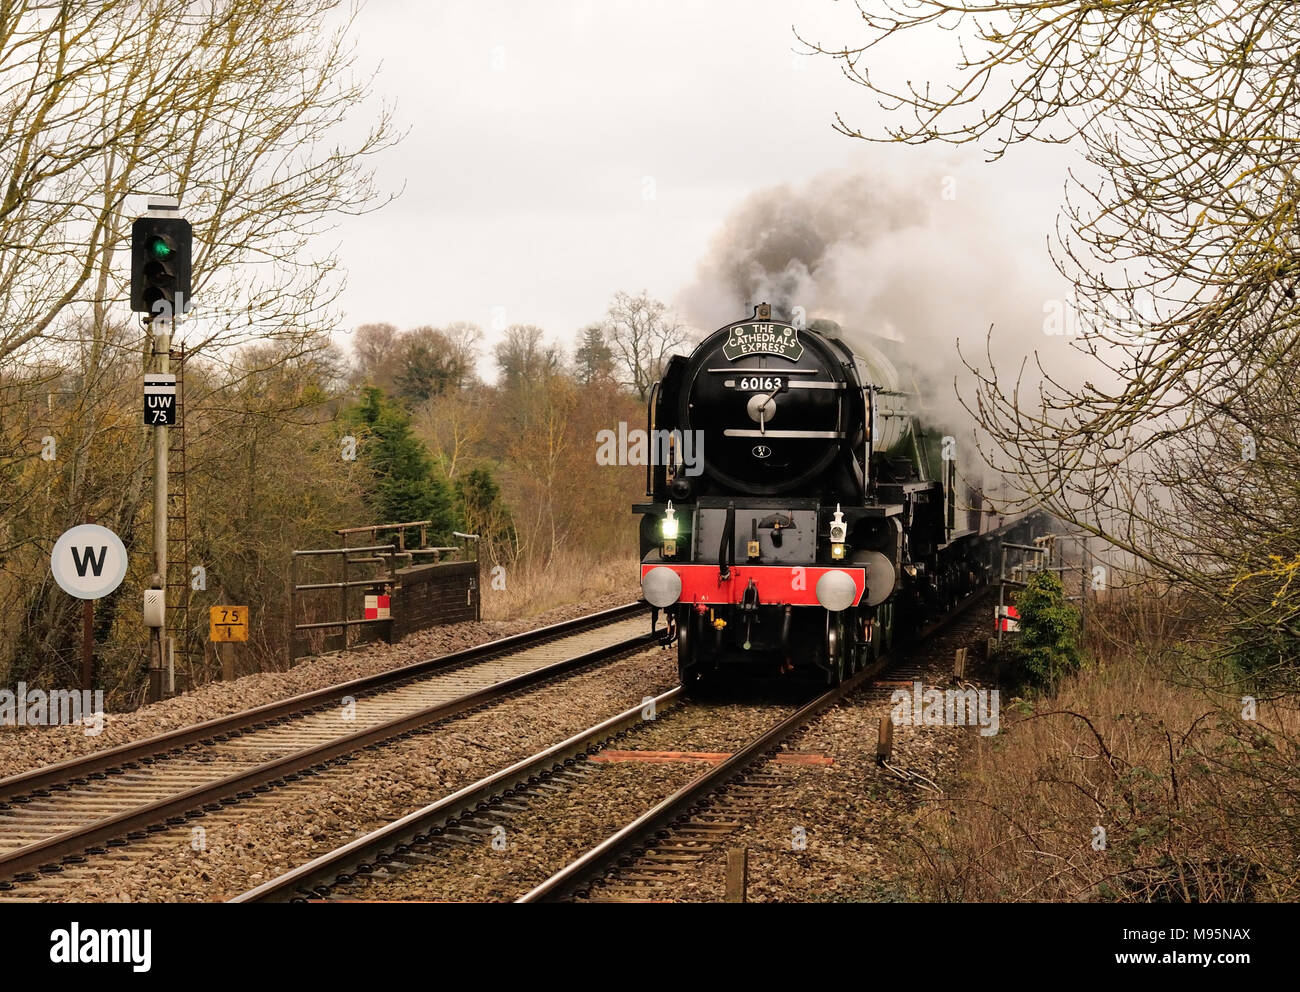 The Cathedrals Express speeding through Pewsey, hauled by Class A1 Pacific No 60163 Tornado. 14th February 2010. Stock Photo